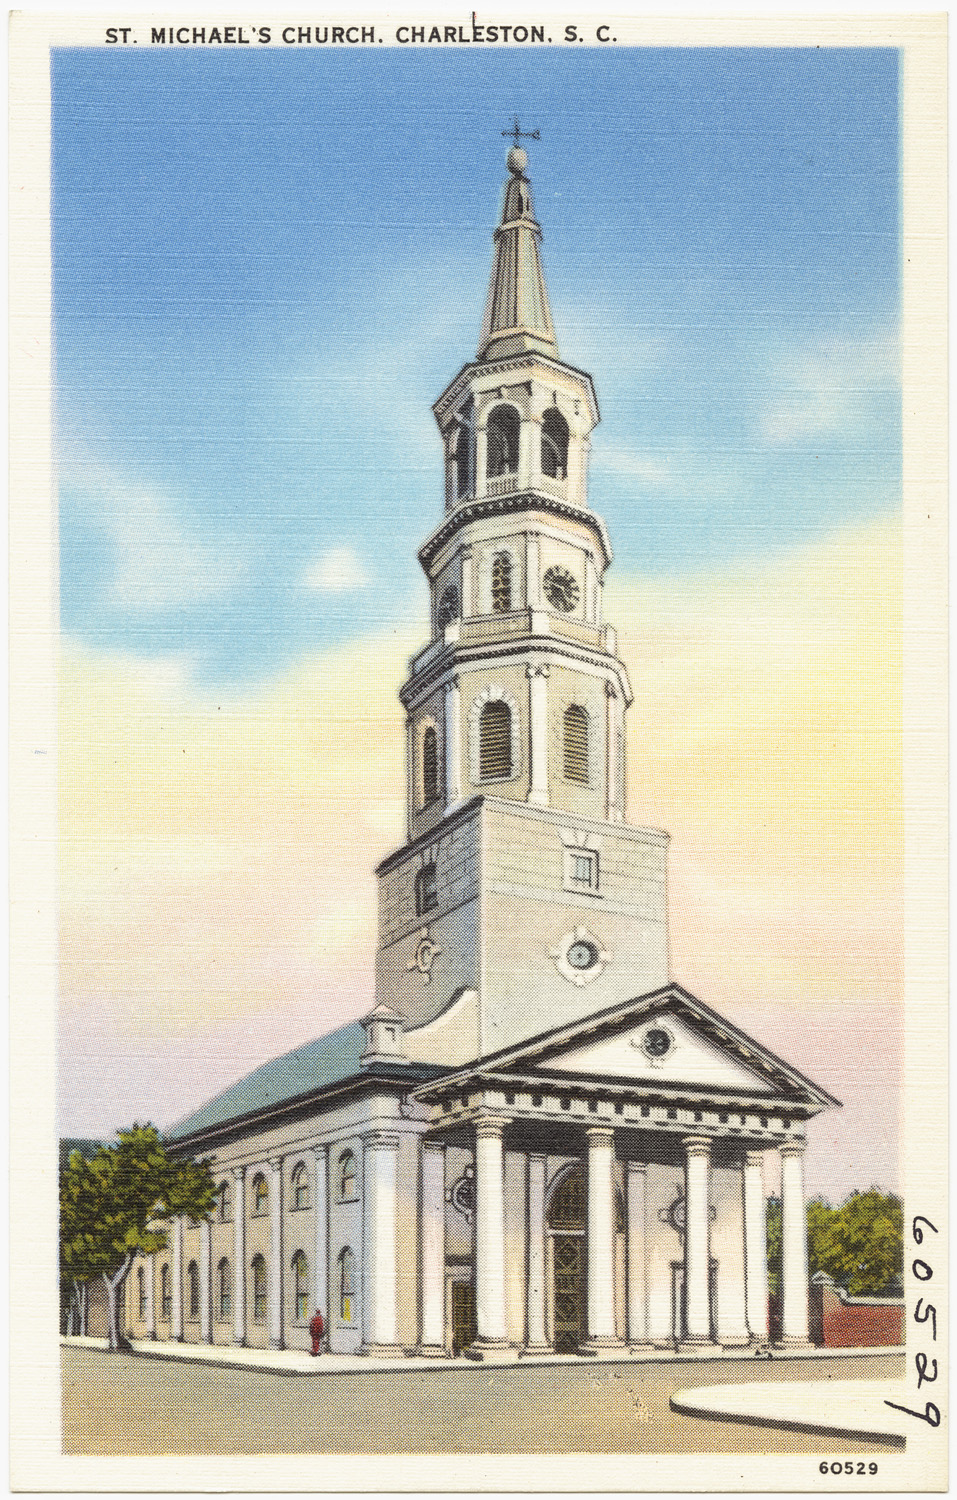 a colorized postcard with a church with a tower